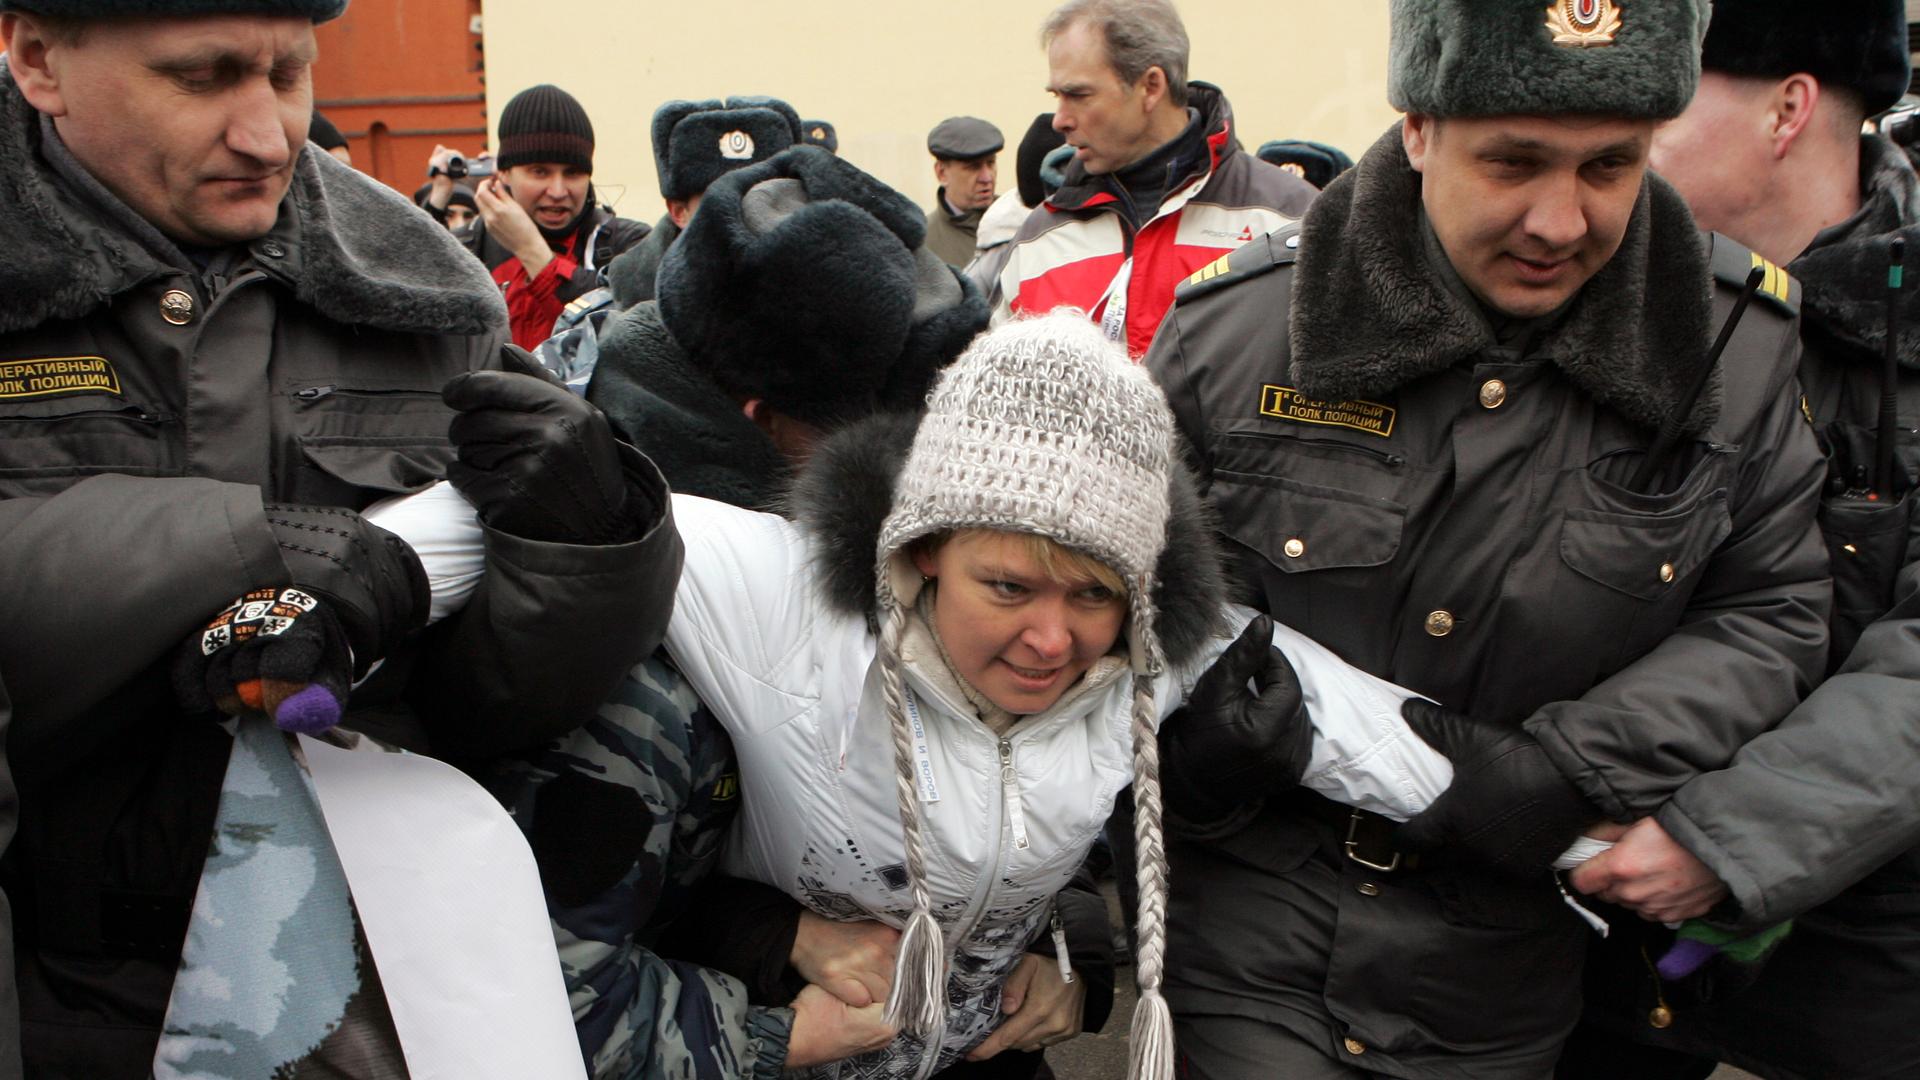 Police detain environmental activist Evgenia Chirikova during an opposition rally in Moscow in 2012. Chirikova's efforts to save a protected forest ultimately made her a leading critic of the Russian government. Now after years of pressure from the govern